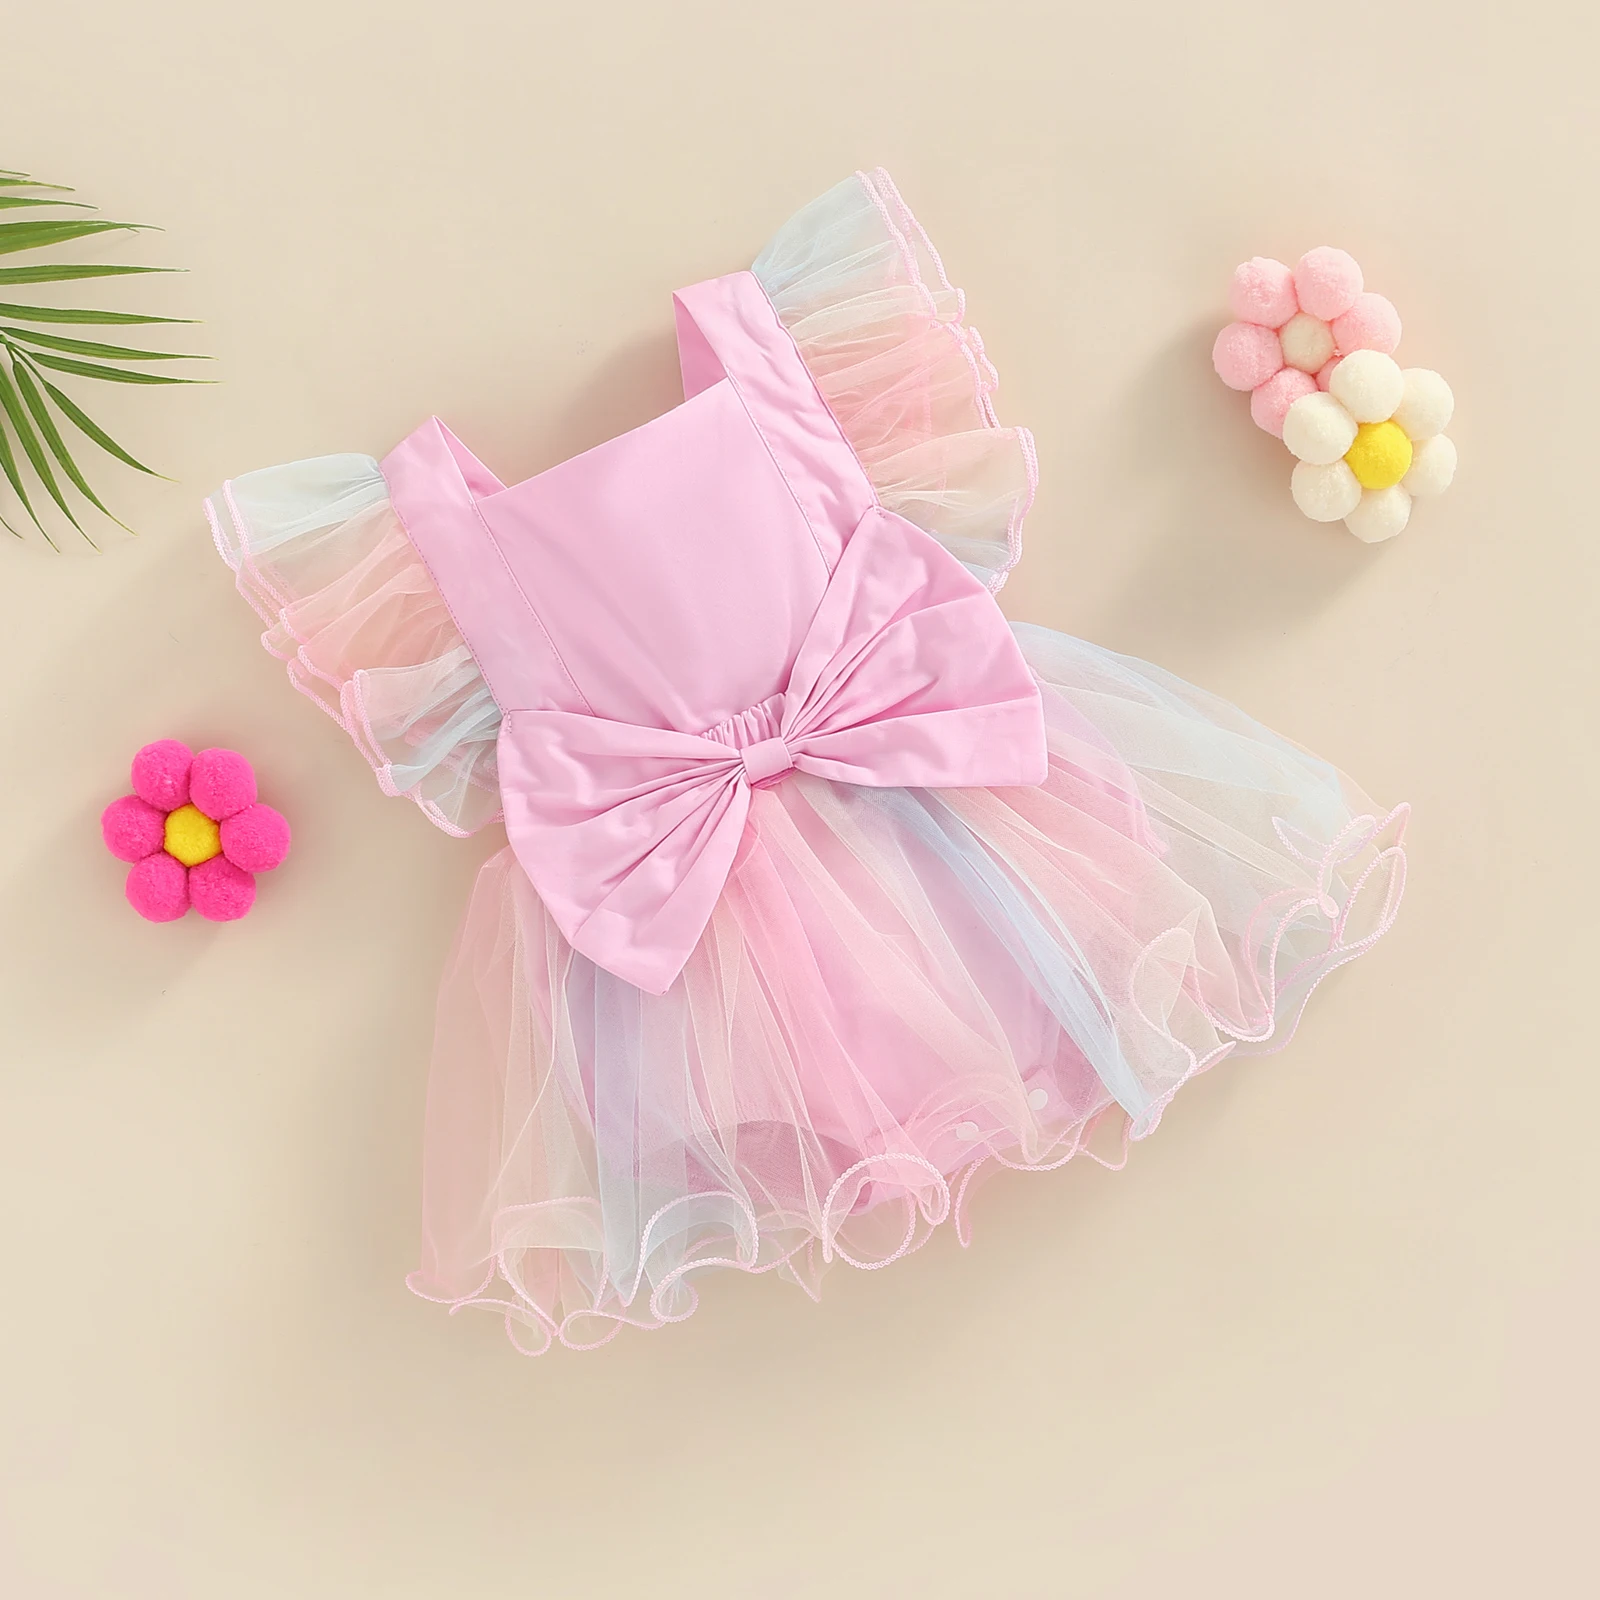 ma&baby 0-24M Newborn Infant Baby Girl Romper Princess Rainbow Tulle Ruffle Jumpsuit Playsuit Birthday Clothing Summer D01 Baby Bodysuits for girl 